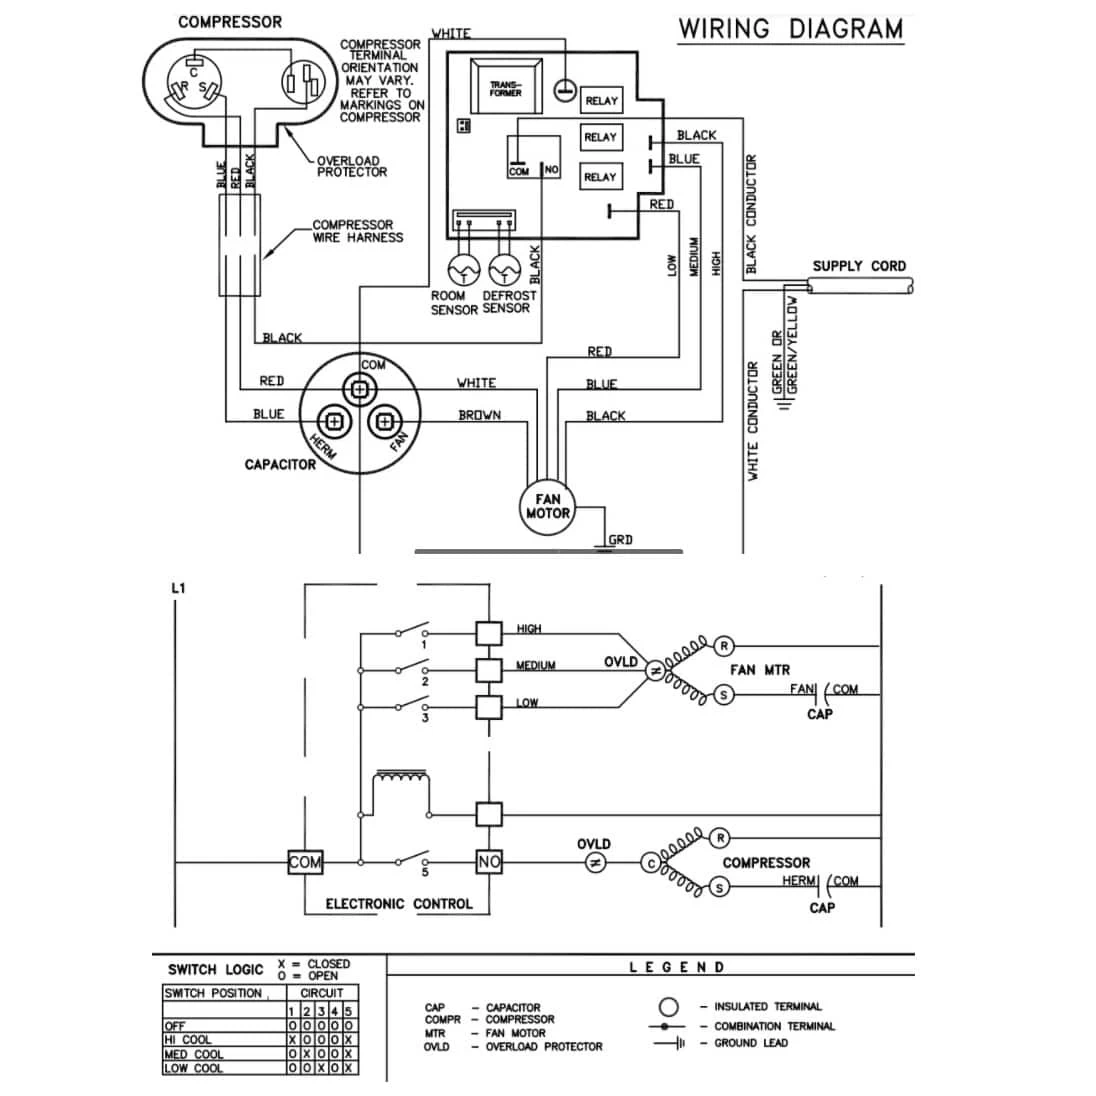 Wallmaster Wiring Diagram Electronic Control Cool Only Models